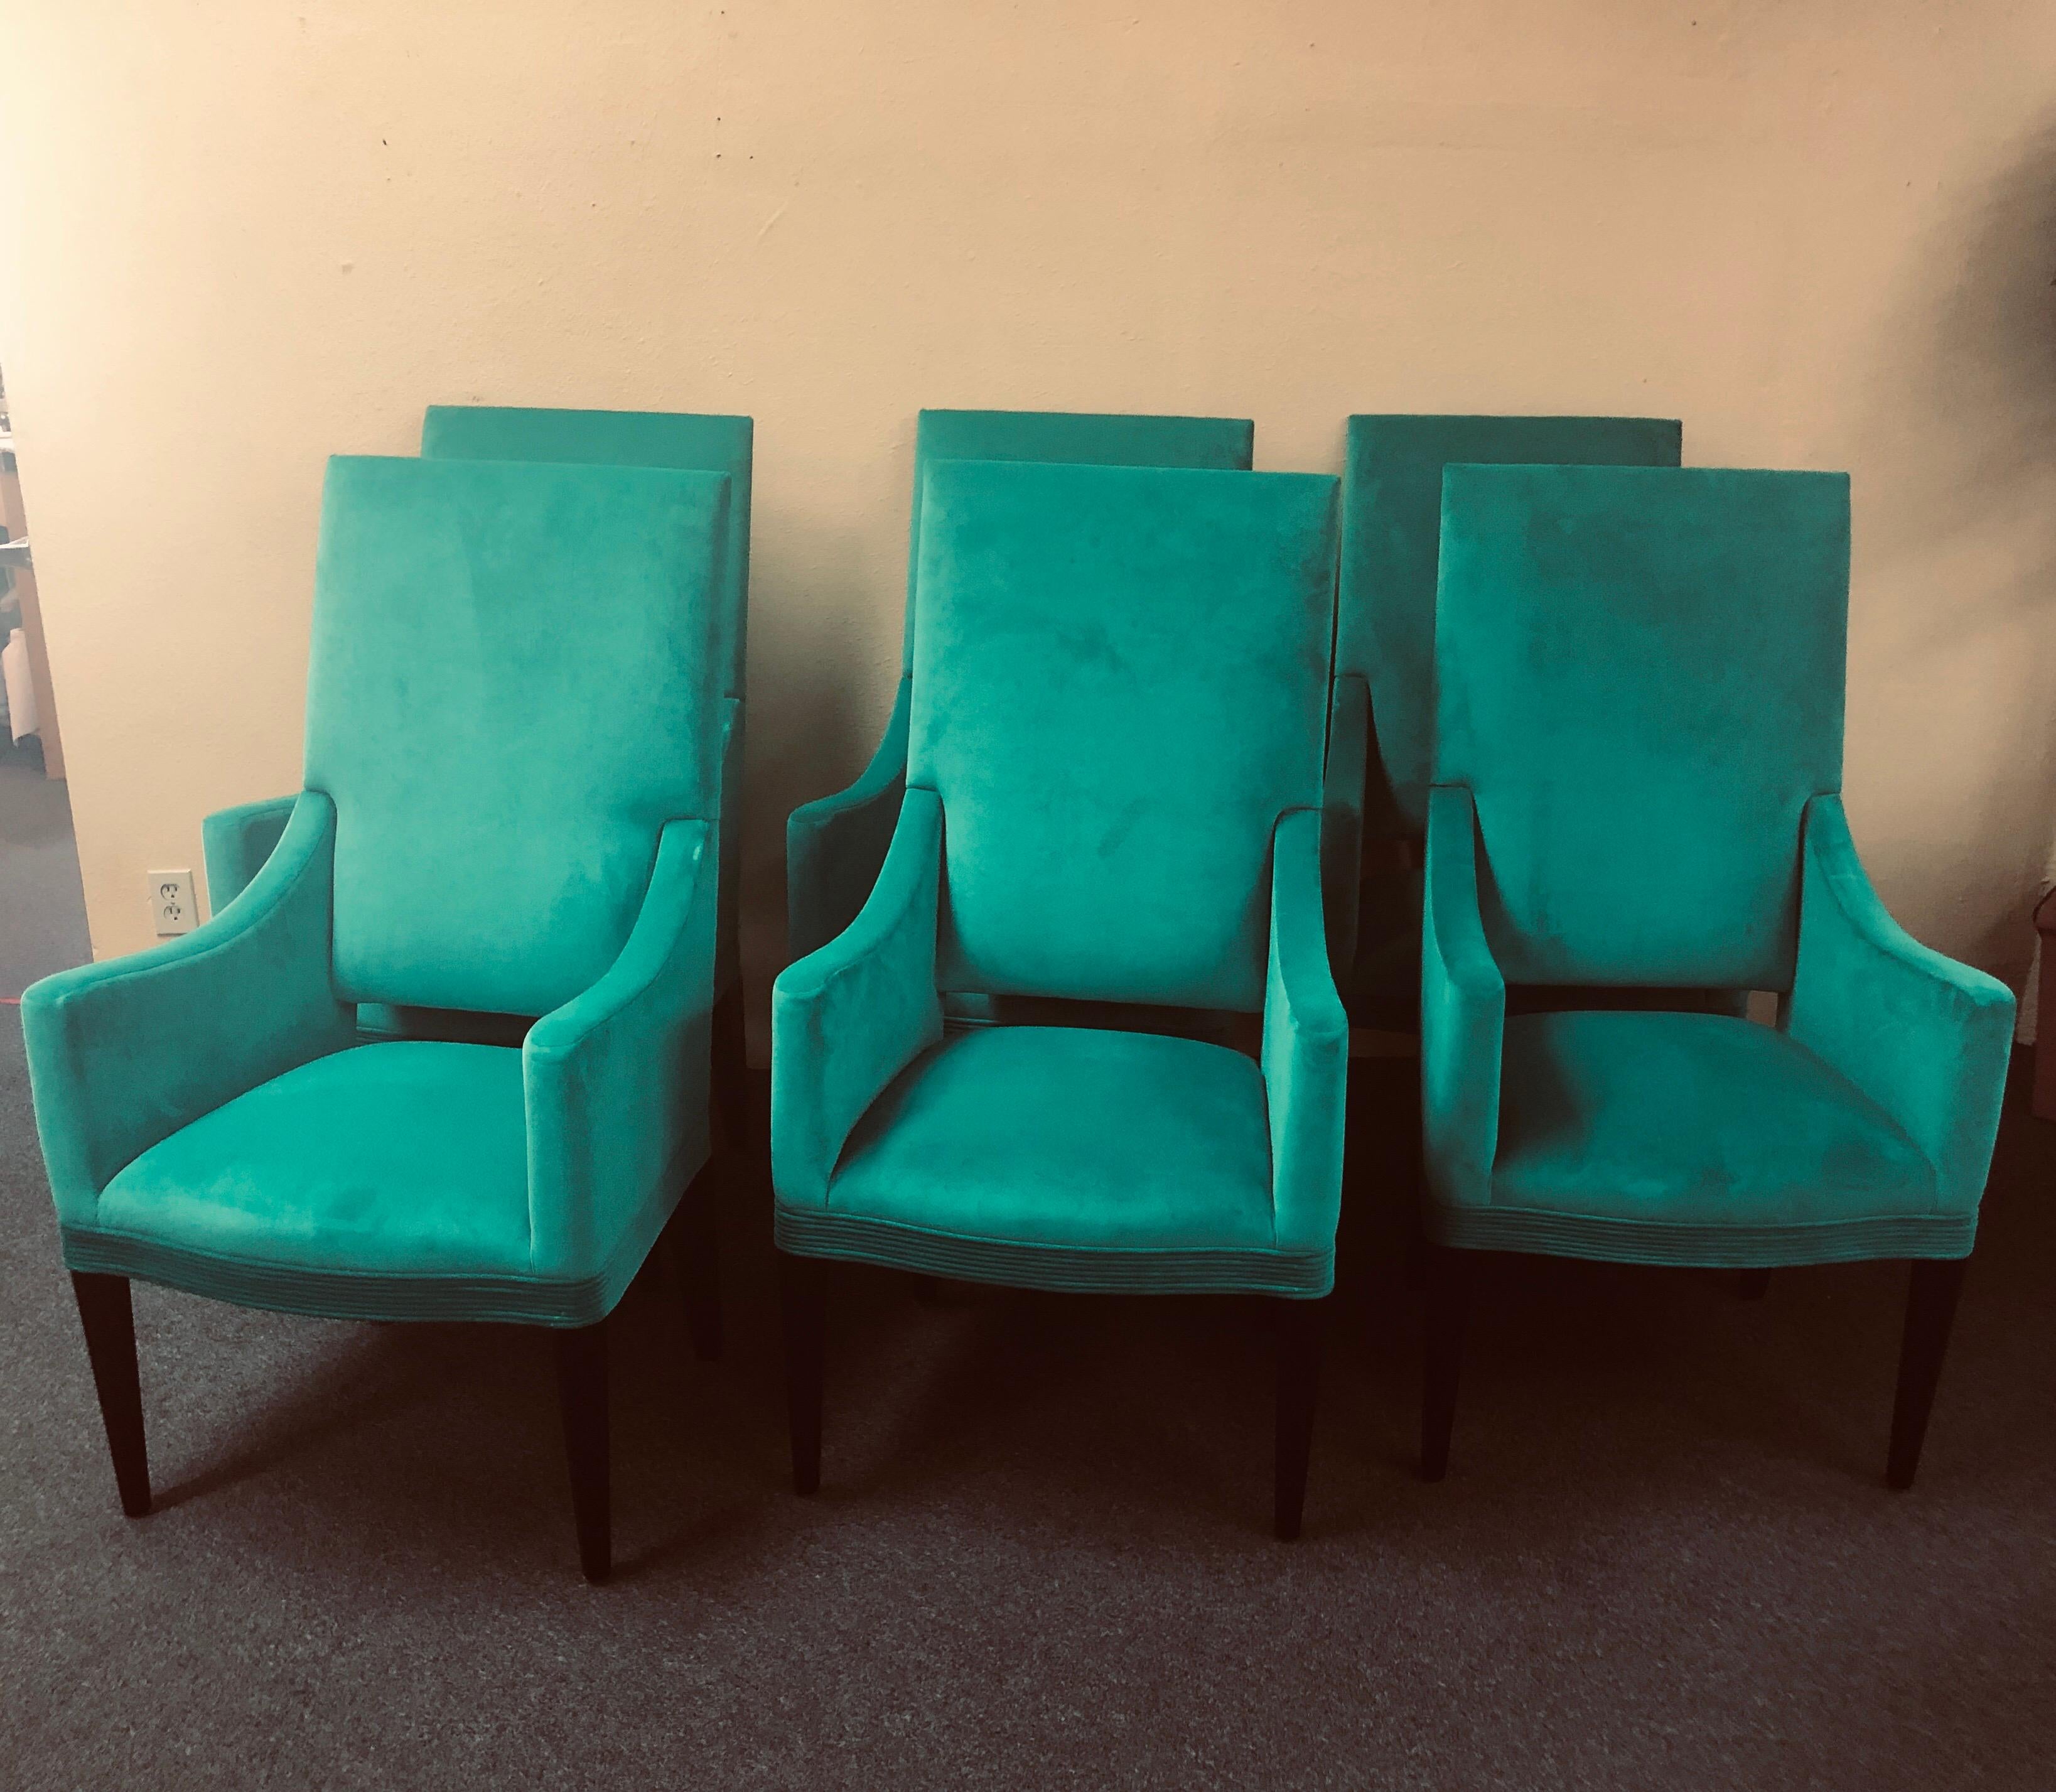 Elegant set of six contemporary high back chairs by Donghia furniture, circa 2000s. The chairs are a kelly green in color with a low profile crushed velvet upholstery. All the chairs have side arms, a high back and matte black octagonal legs and are